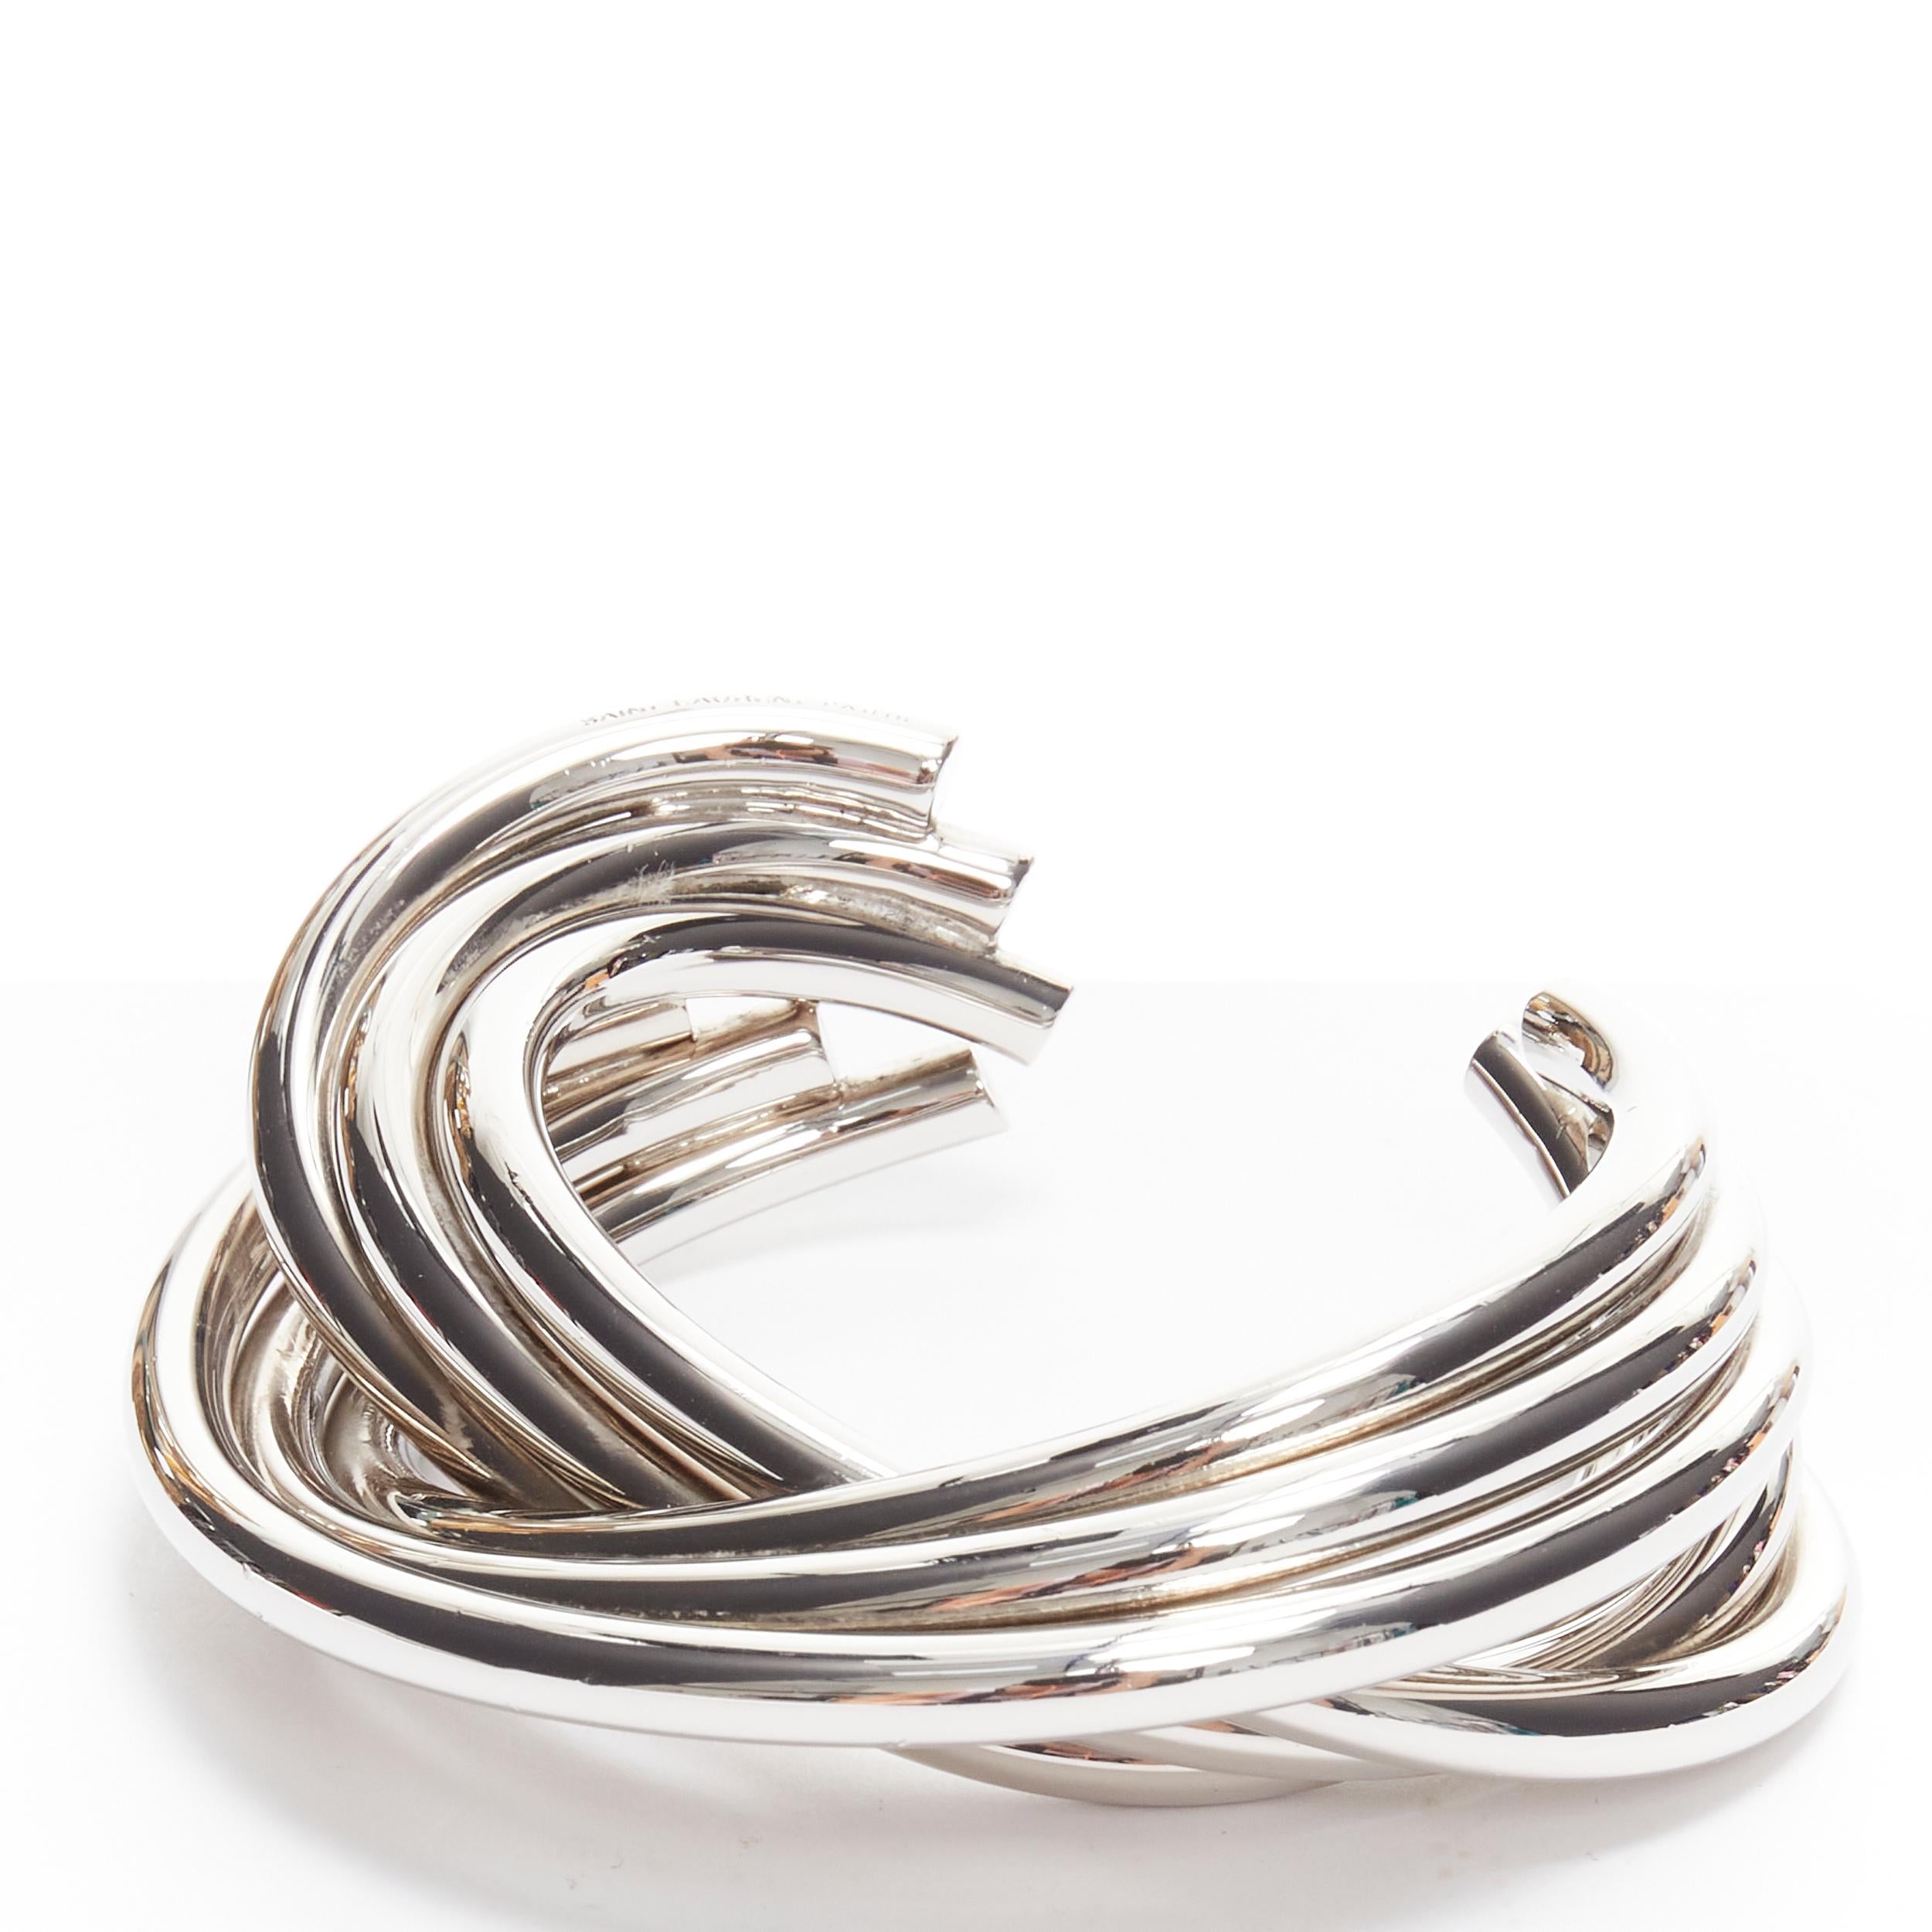 SAINT LAURENT Hedi Slimane silver brass architectural 6 layer twist cuff 
Reference: TGAS/B01785 
Brand: Saint Laurent 
Designer: Hedi Slimane 
Color: Silver 
Pattern: Solid 
Extra Detail: Hedi Slimane for Saint Laurent. Designed to look like 6